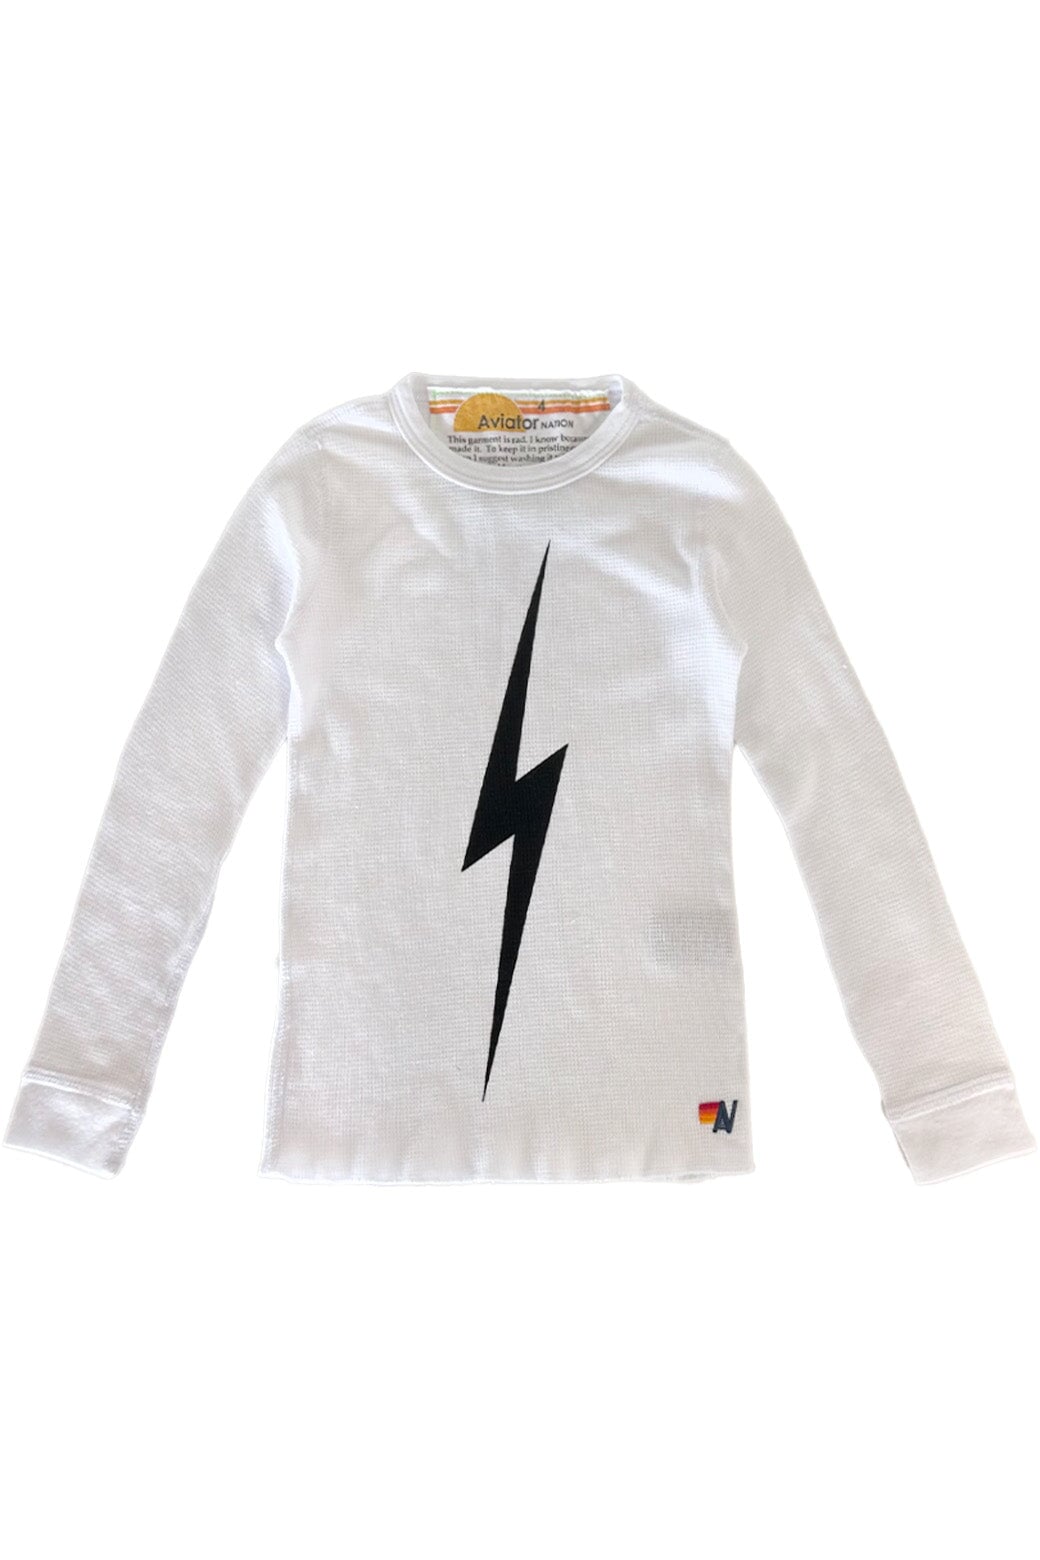 KID&#39;S BOLT THERMAL - WHITE Kid&#39;s Thermal Aviator Nation 